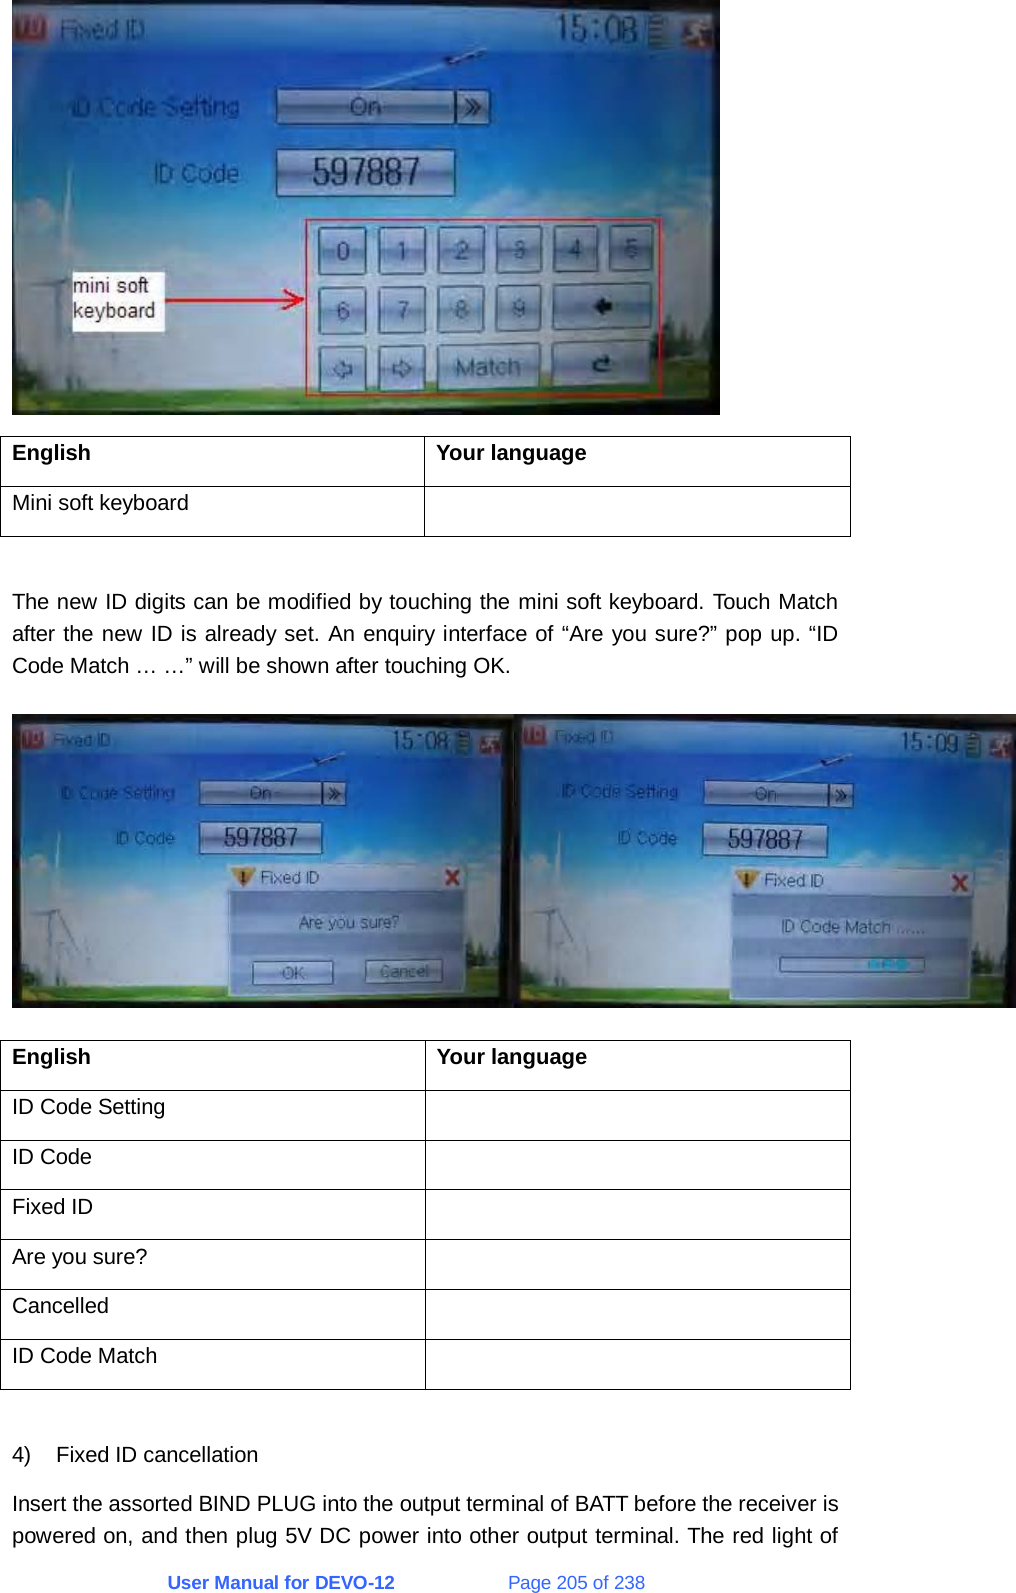 User Manual for DEVO-12             Page 205 of 238  English Your language Mini soft keyboard    The new ID digits can be modified by touching the mini soft keyboard. Touch Match after the new ID is already set. An enquiry interface of “Are you sure?” pop up. “ID Code Match … …” will be shown after touching OK.  English Your language ID Code Setting   ID Code   Fixed ID   Are you sure?   Cancelled  ID Code Match    4)  Fixed ID cancellation Insert the assorted BIND PLUG into the output terminal of BATT before the receiver is powered on, and then plug 5V DC power into other output terminal. The red light of 